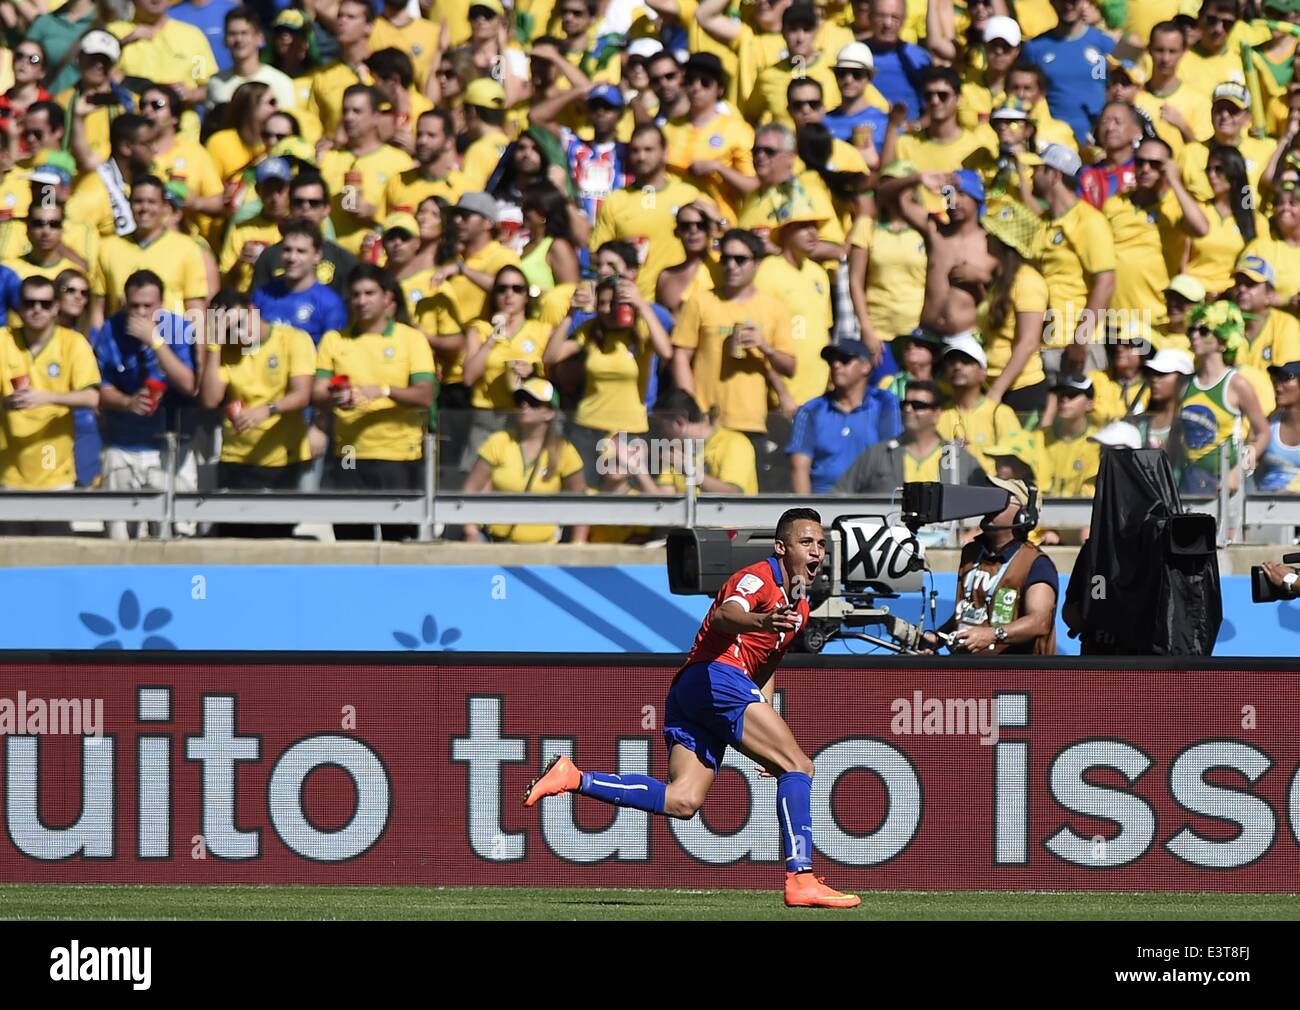 Belo Horizonte, Brazil. 28th June, 2014. Chile's Alexis Sanchez celebrates a goal during a Round of 16 match between Brazil and Chile of 2014 FIFA World Cup at the Estadio Mineirao Stadium in Belo Horizonte, Brazil, on June 28, 2014. Credit:  Qi Heng/Xinhua/Alamy Live News Stock Photo